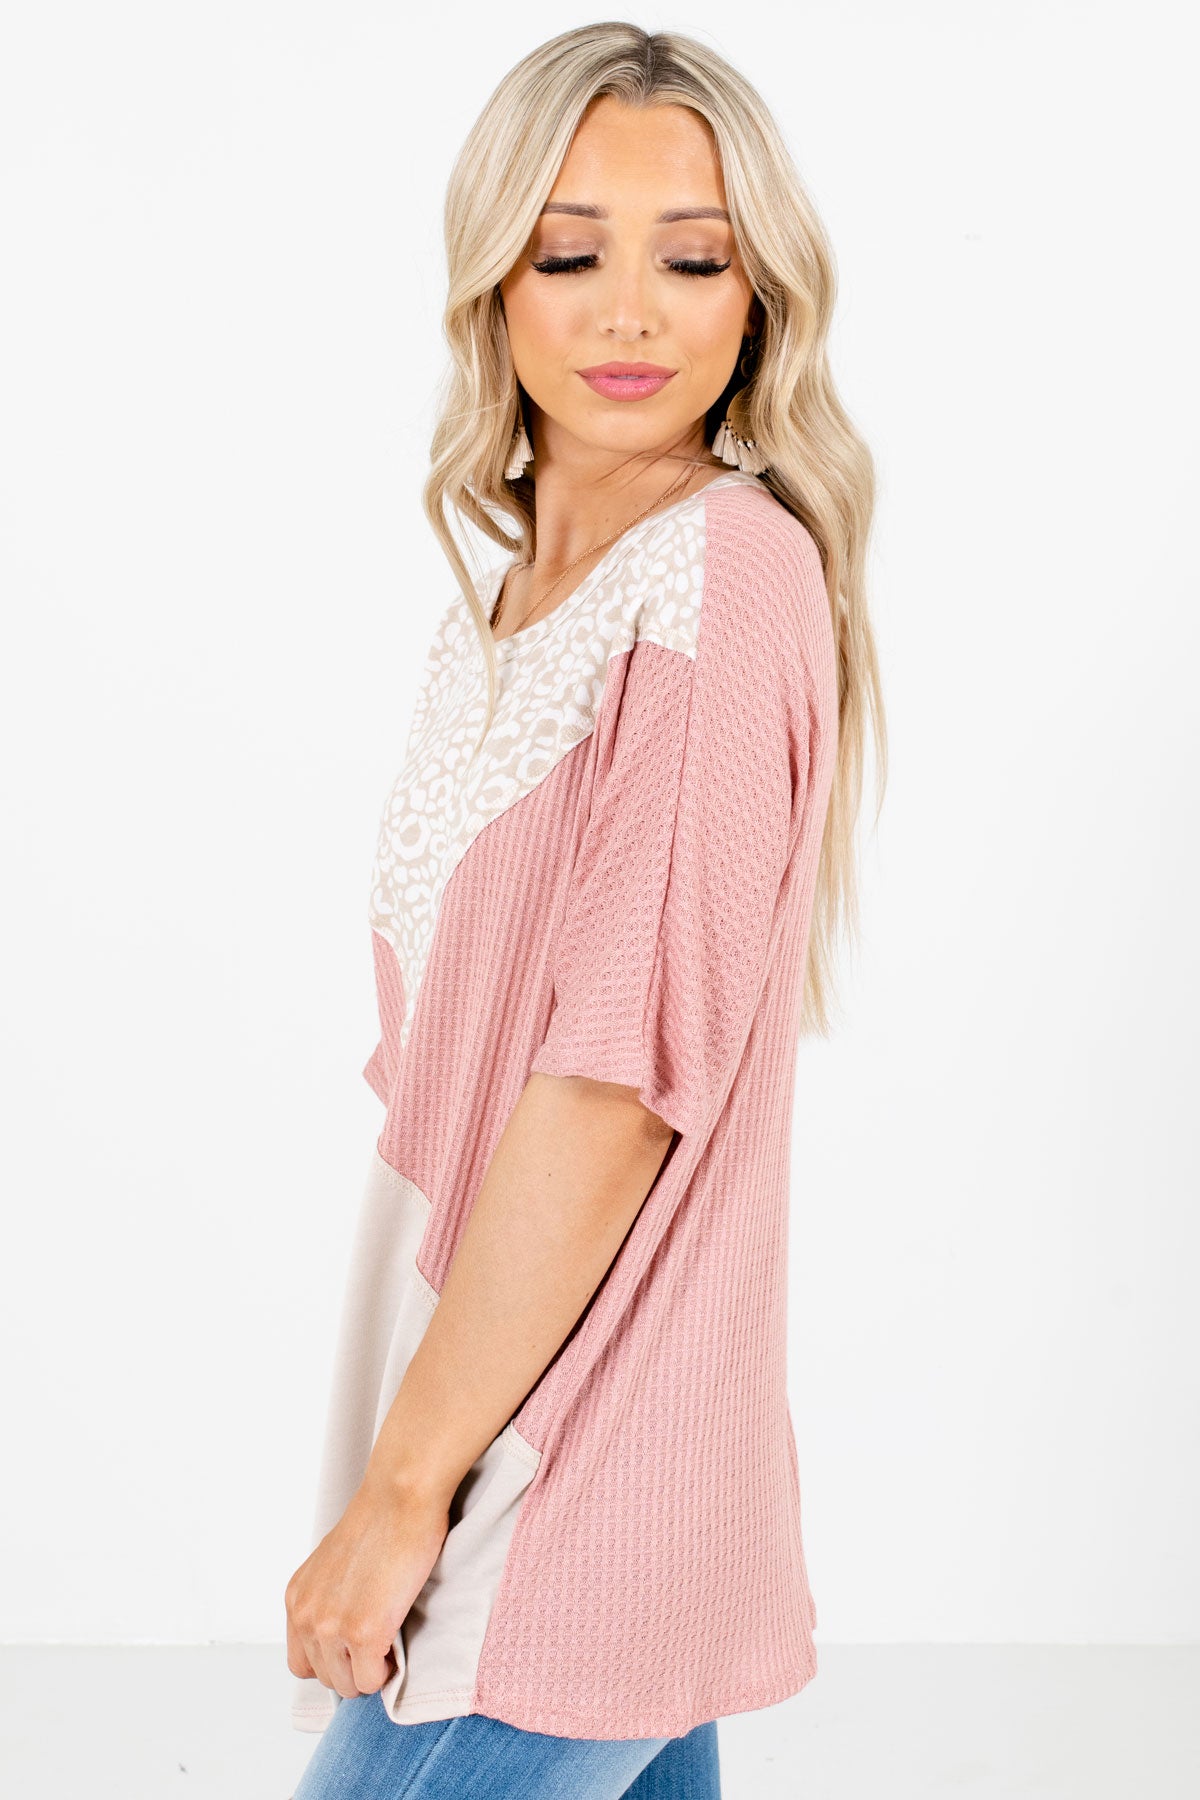 Pink Short Sleeve Boutique Tops for Women